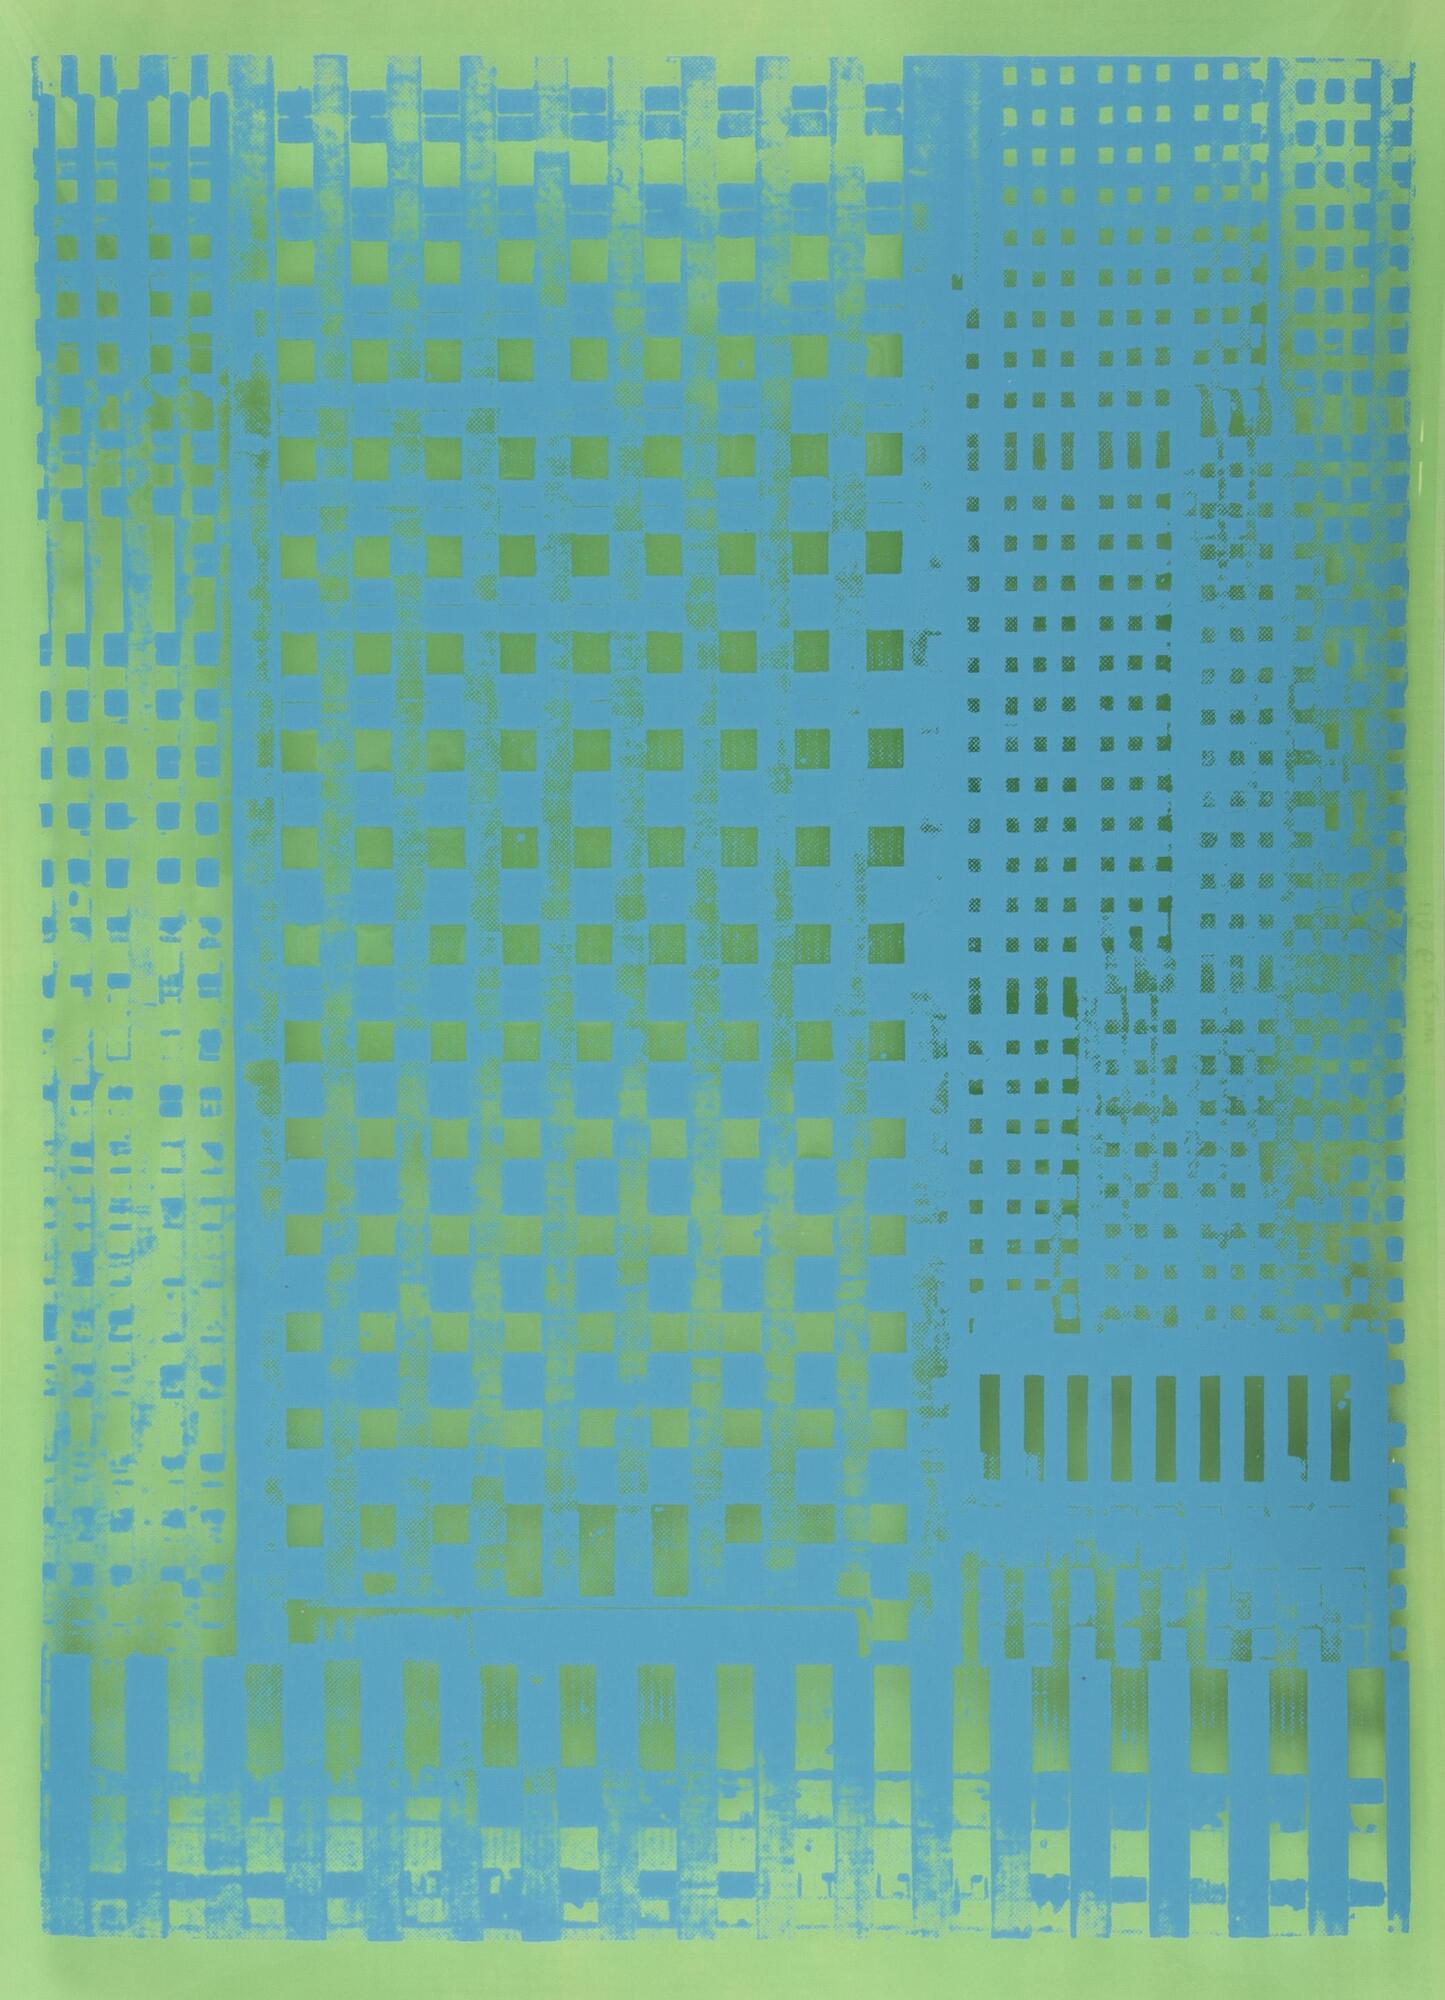 This screenprint in blue on green has a series of overlapping patterns of rectangles in a grid.